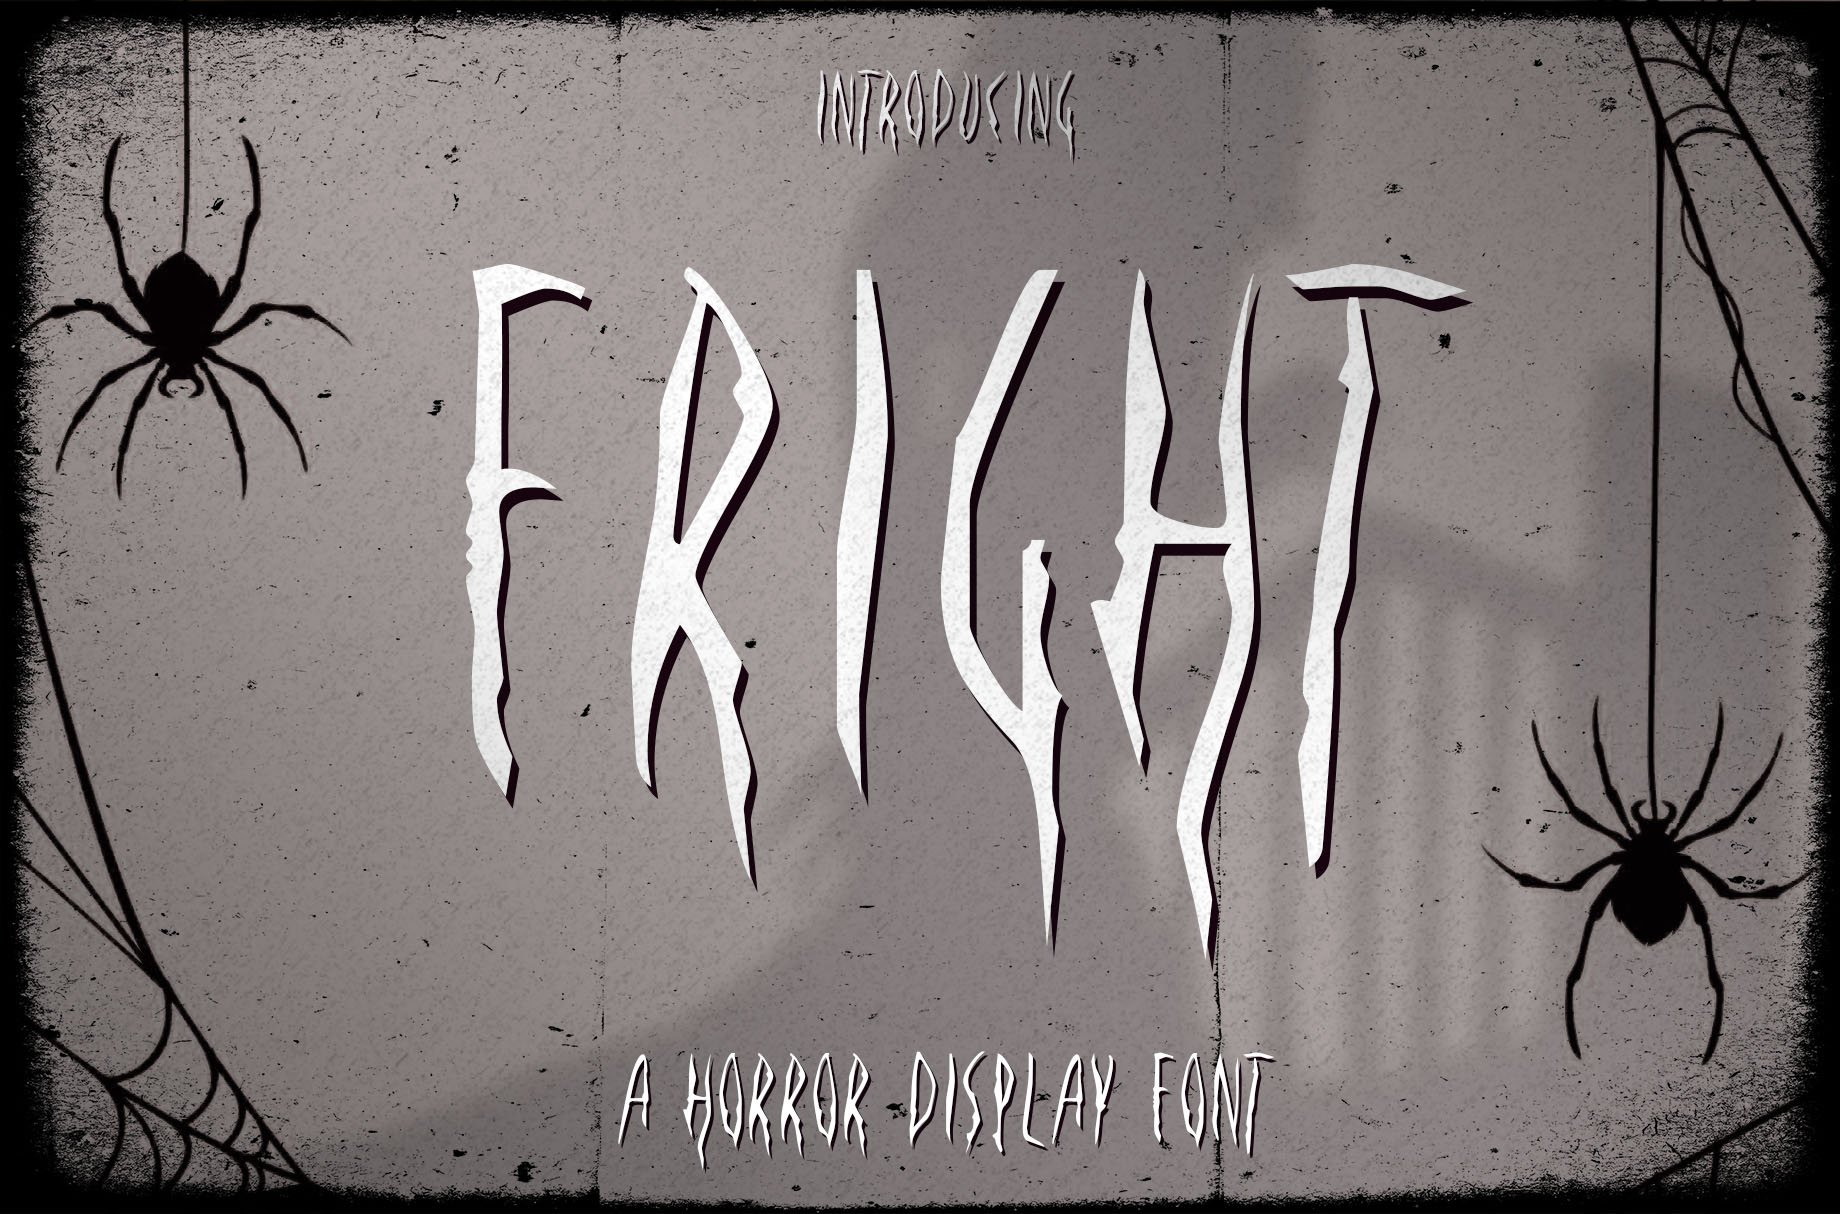 Fright - A Horror Display Font cover image.